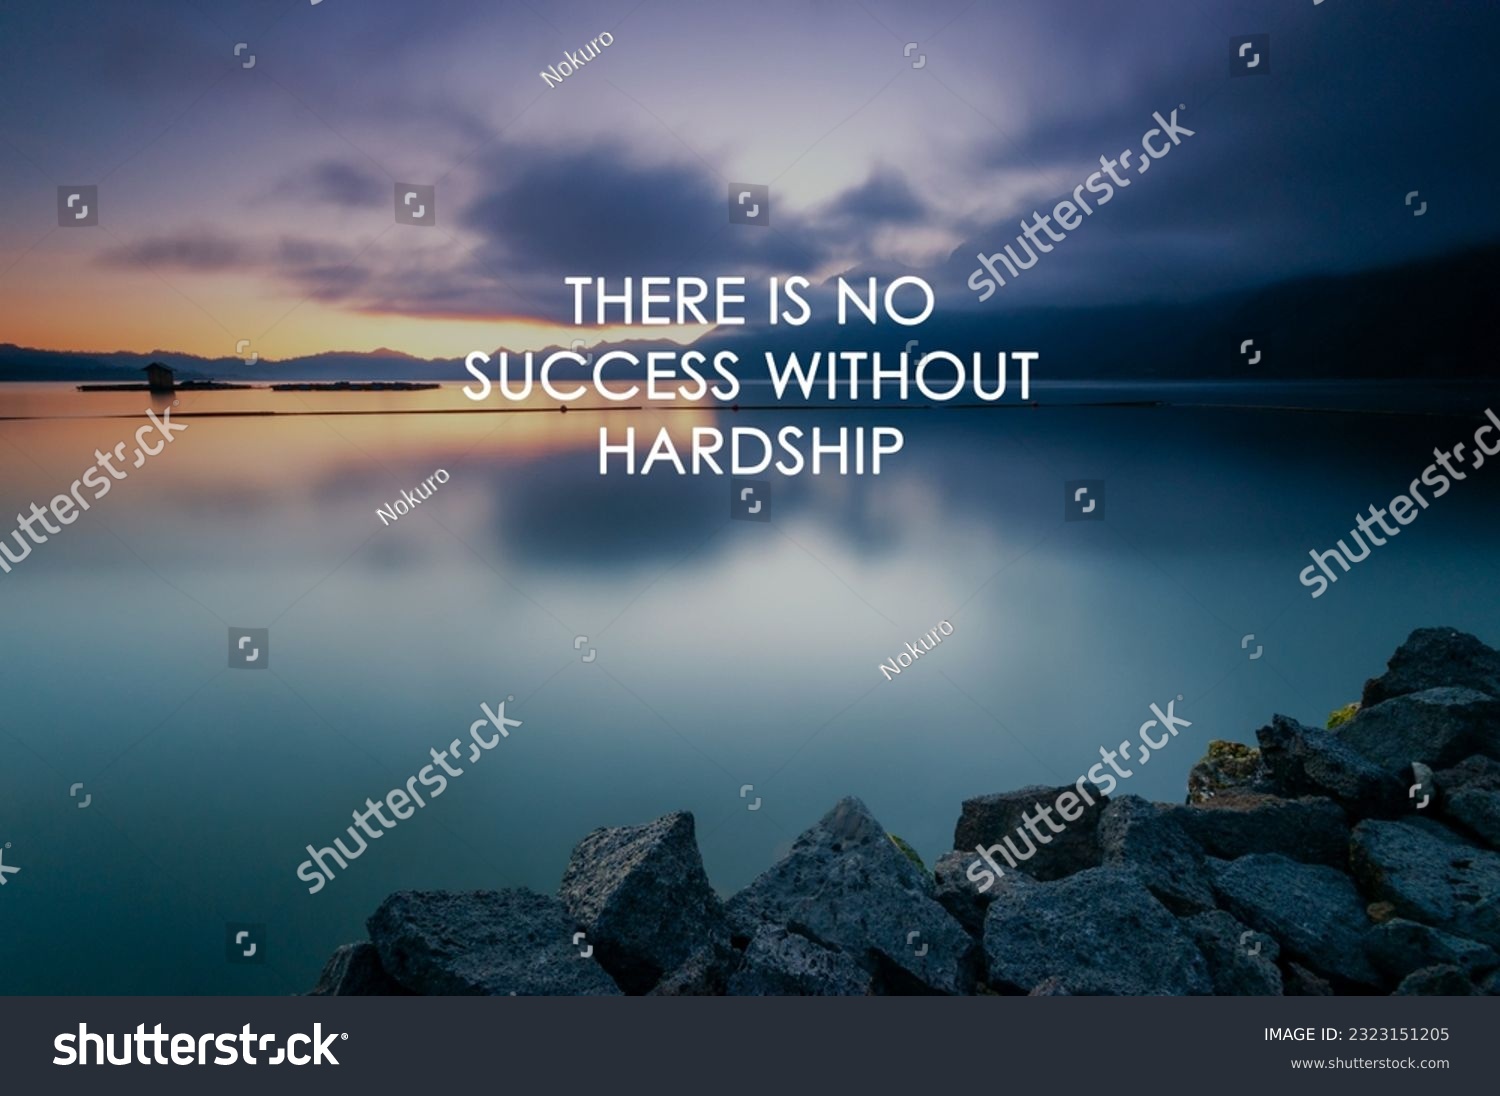 Sunset background with life inspirational quotes - There is no success without hardship #2323151205